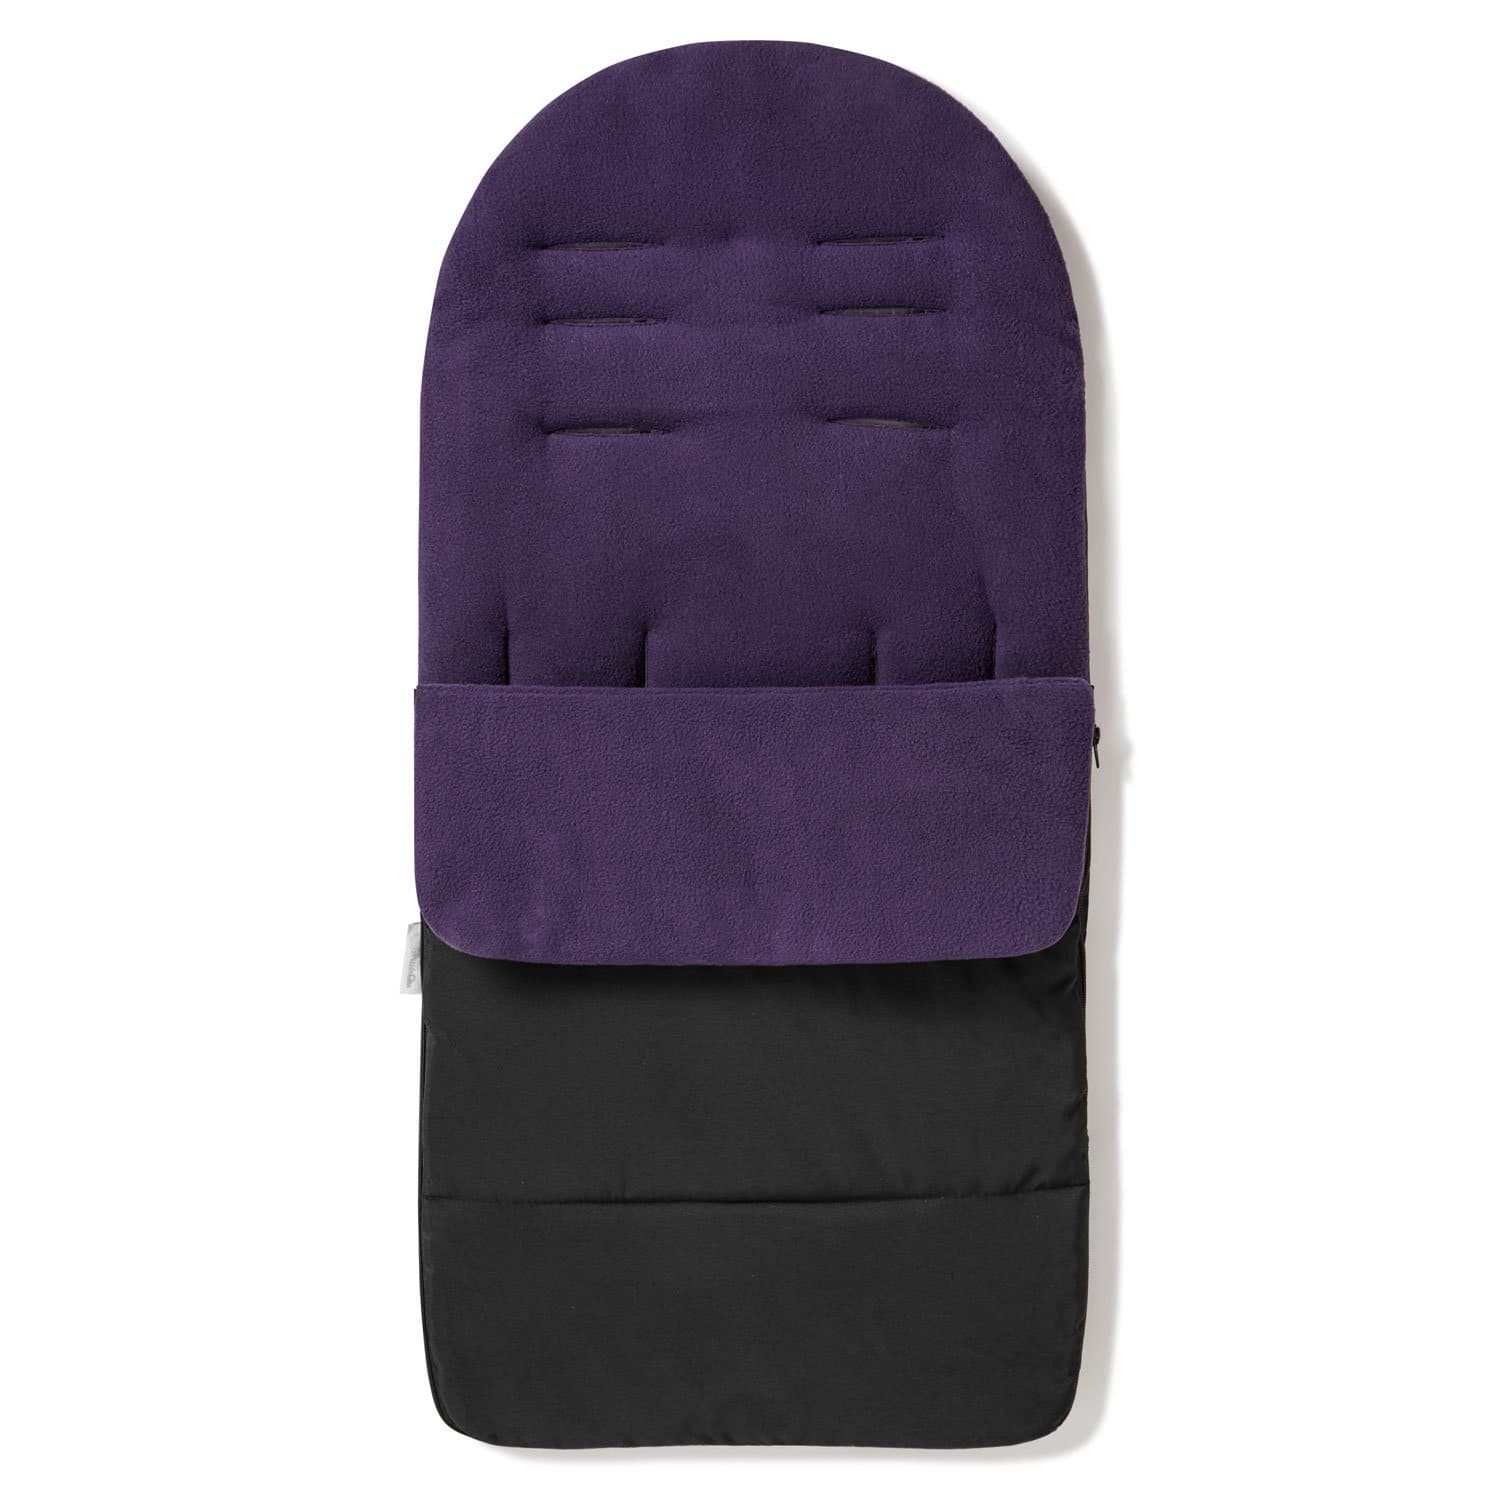 Premium Footmuff / Cosy Toes Compatible with Phil & Teds - Plum Purple / Fits All Models | For Your Little One